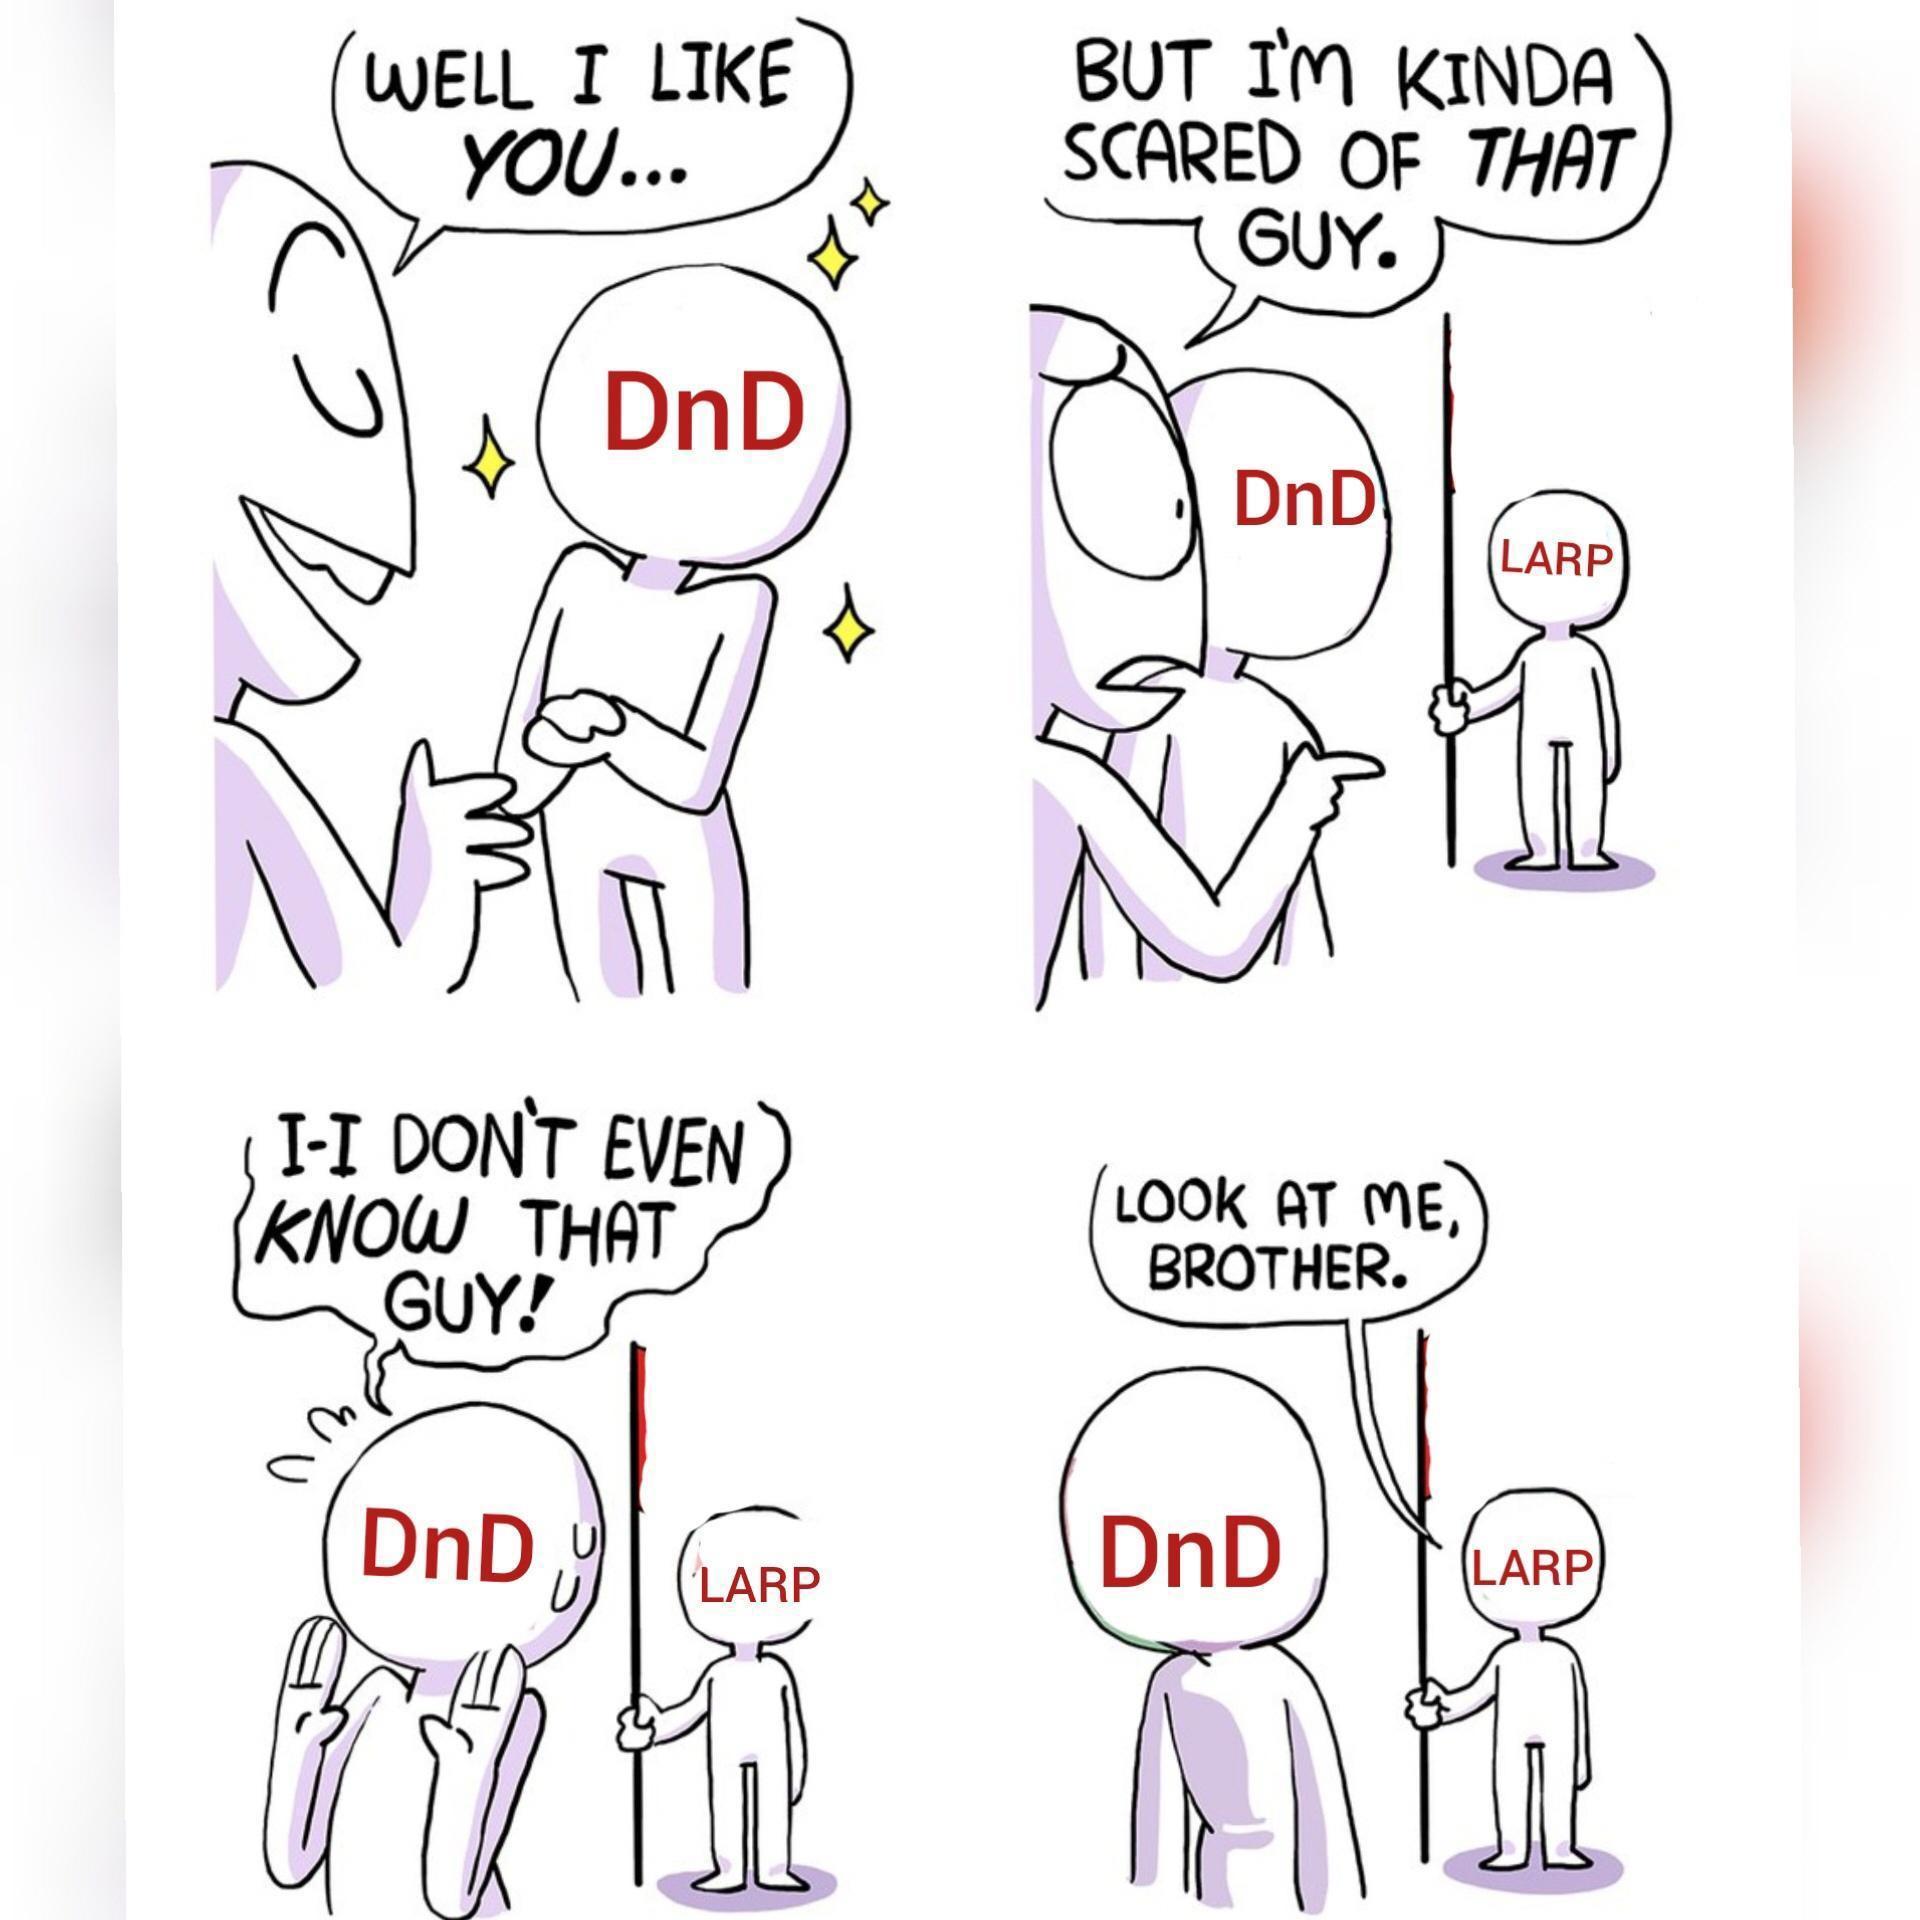 fresh memes - brother look at me meme - Well I You... DnD Iv II Don'T Even Know That Guy! DnD 17 Larp But I'M Kinda Scared Of That Guy. DnD Look At Me, Brother. DnD Larp Larp